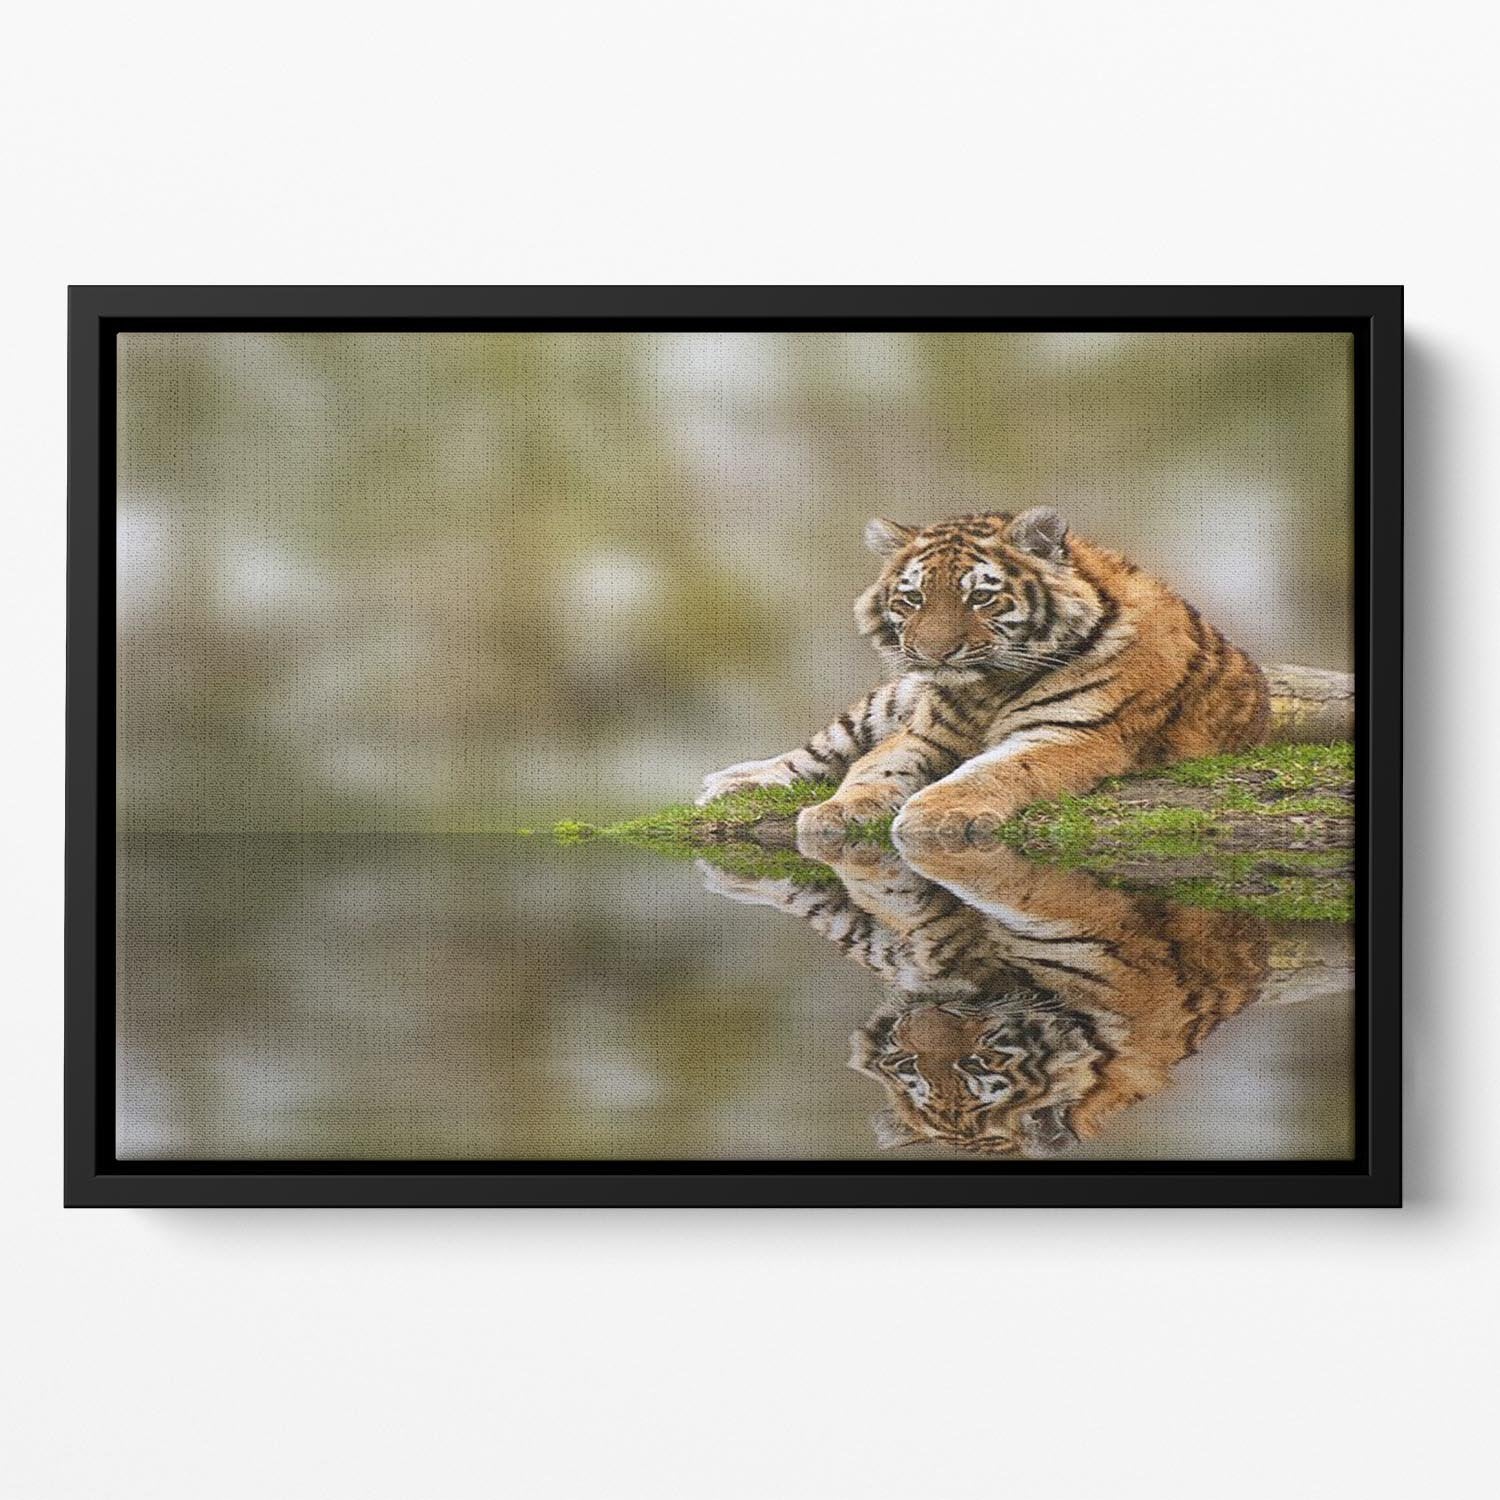 Sttunning tiger cub relaxing on a warm day Floating Framed Canvas - Canvas Art Rocks - 2